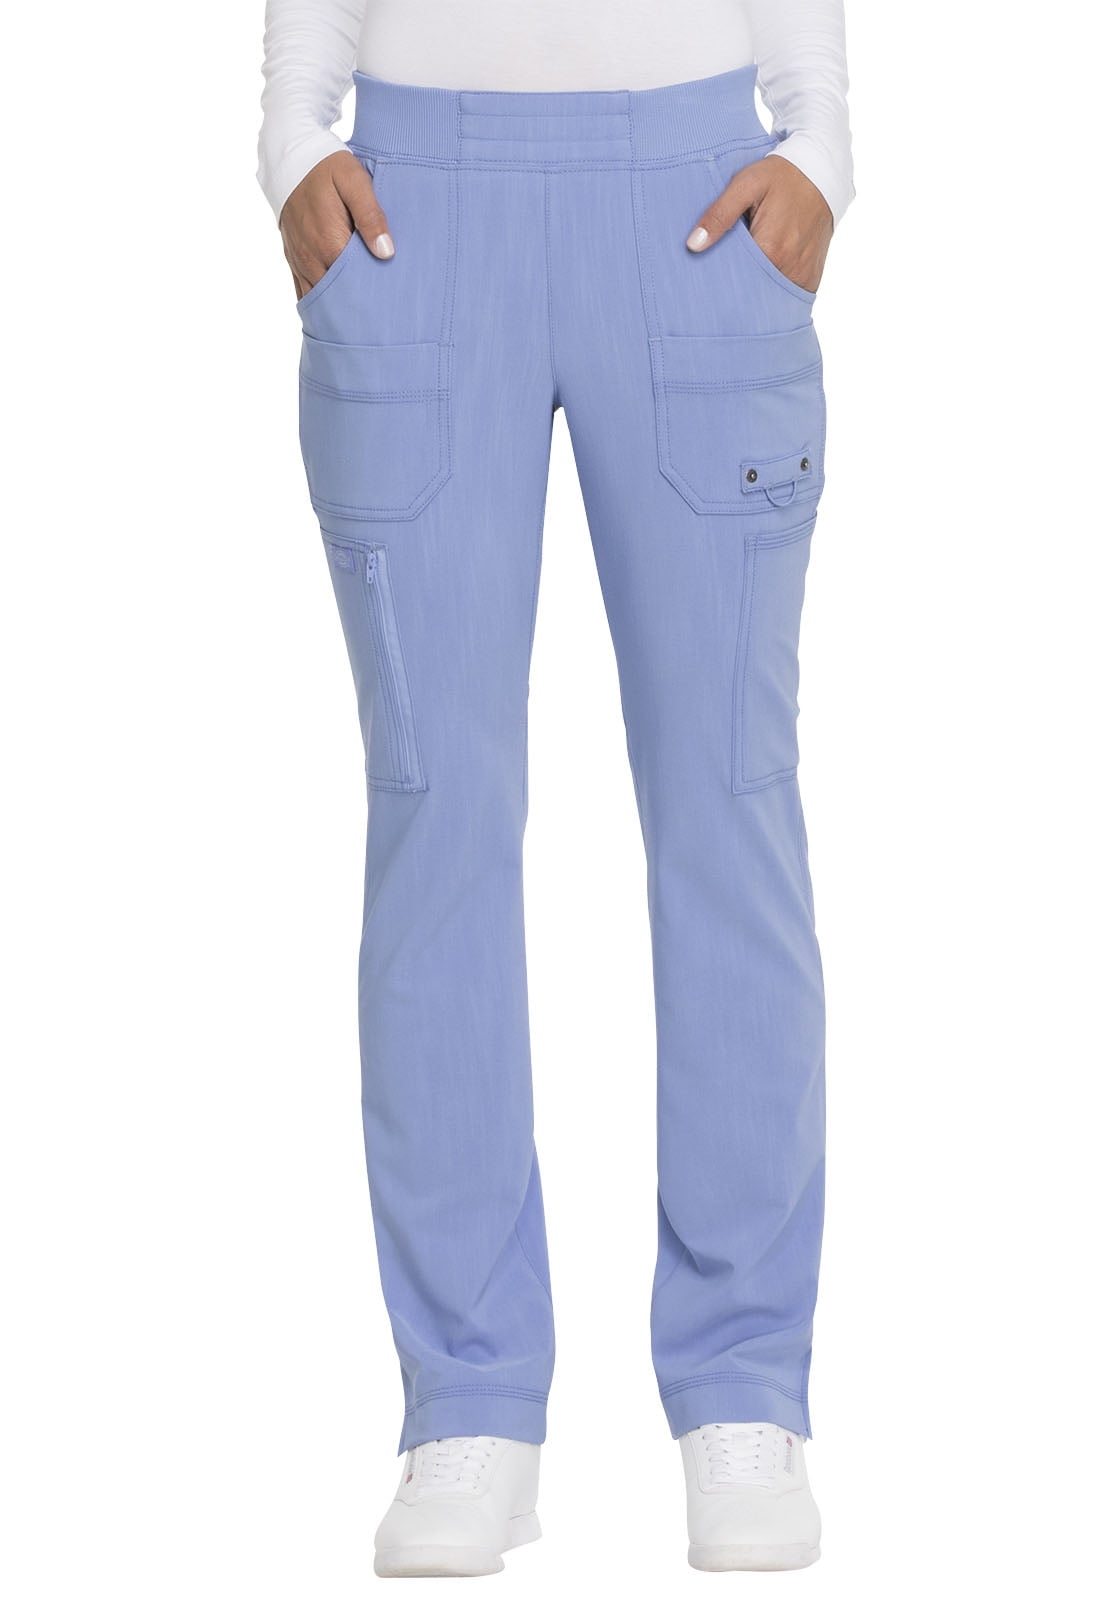 Pewter Dickies Scrubs Advance Mid Rise Tapered Leg Pull On Pants DK195 PWT 